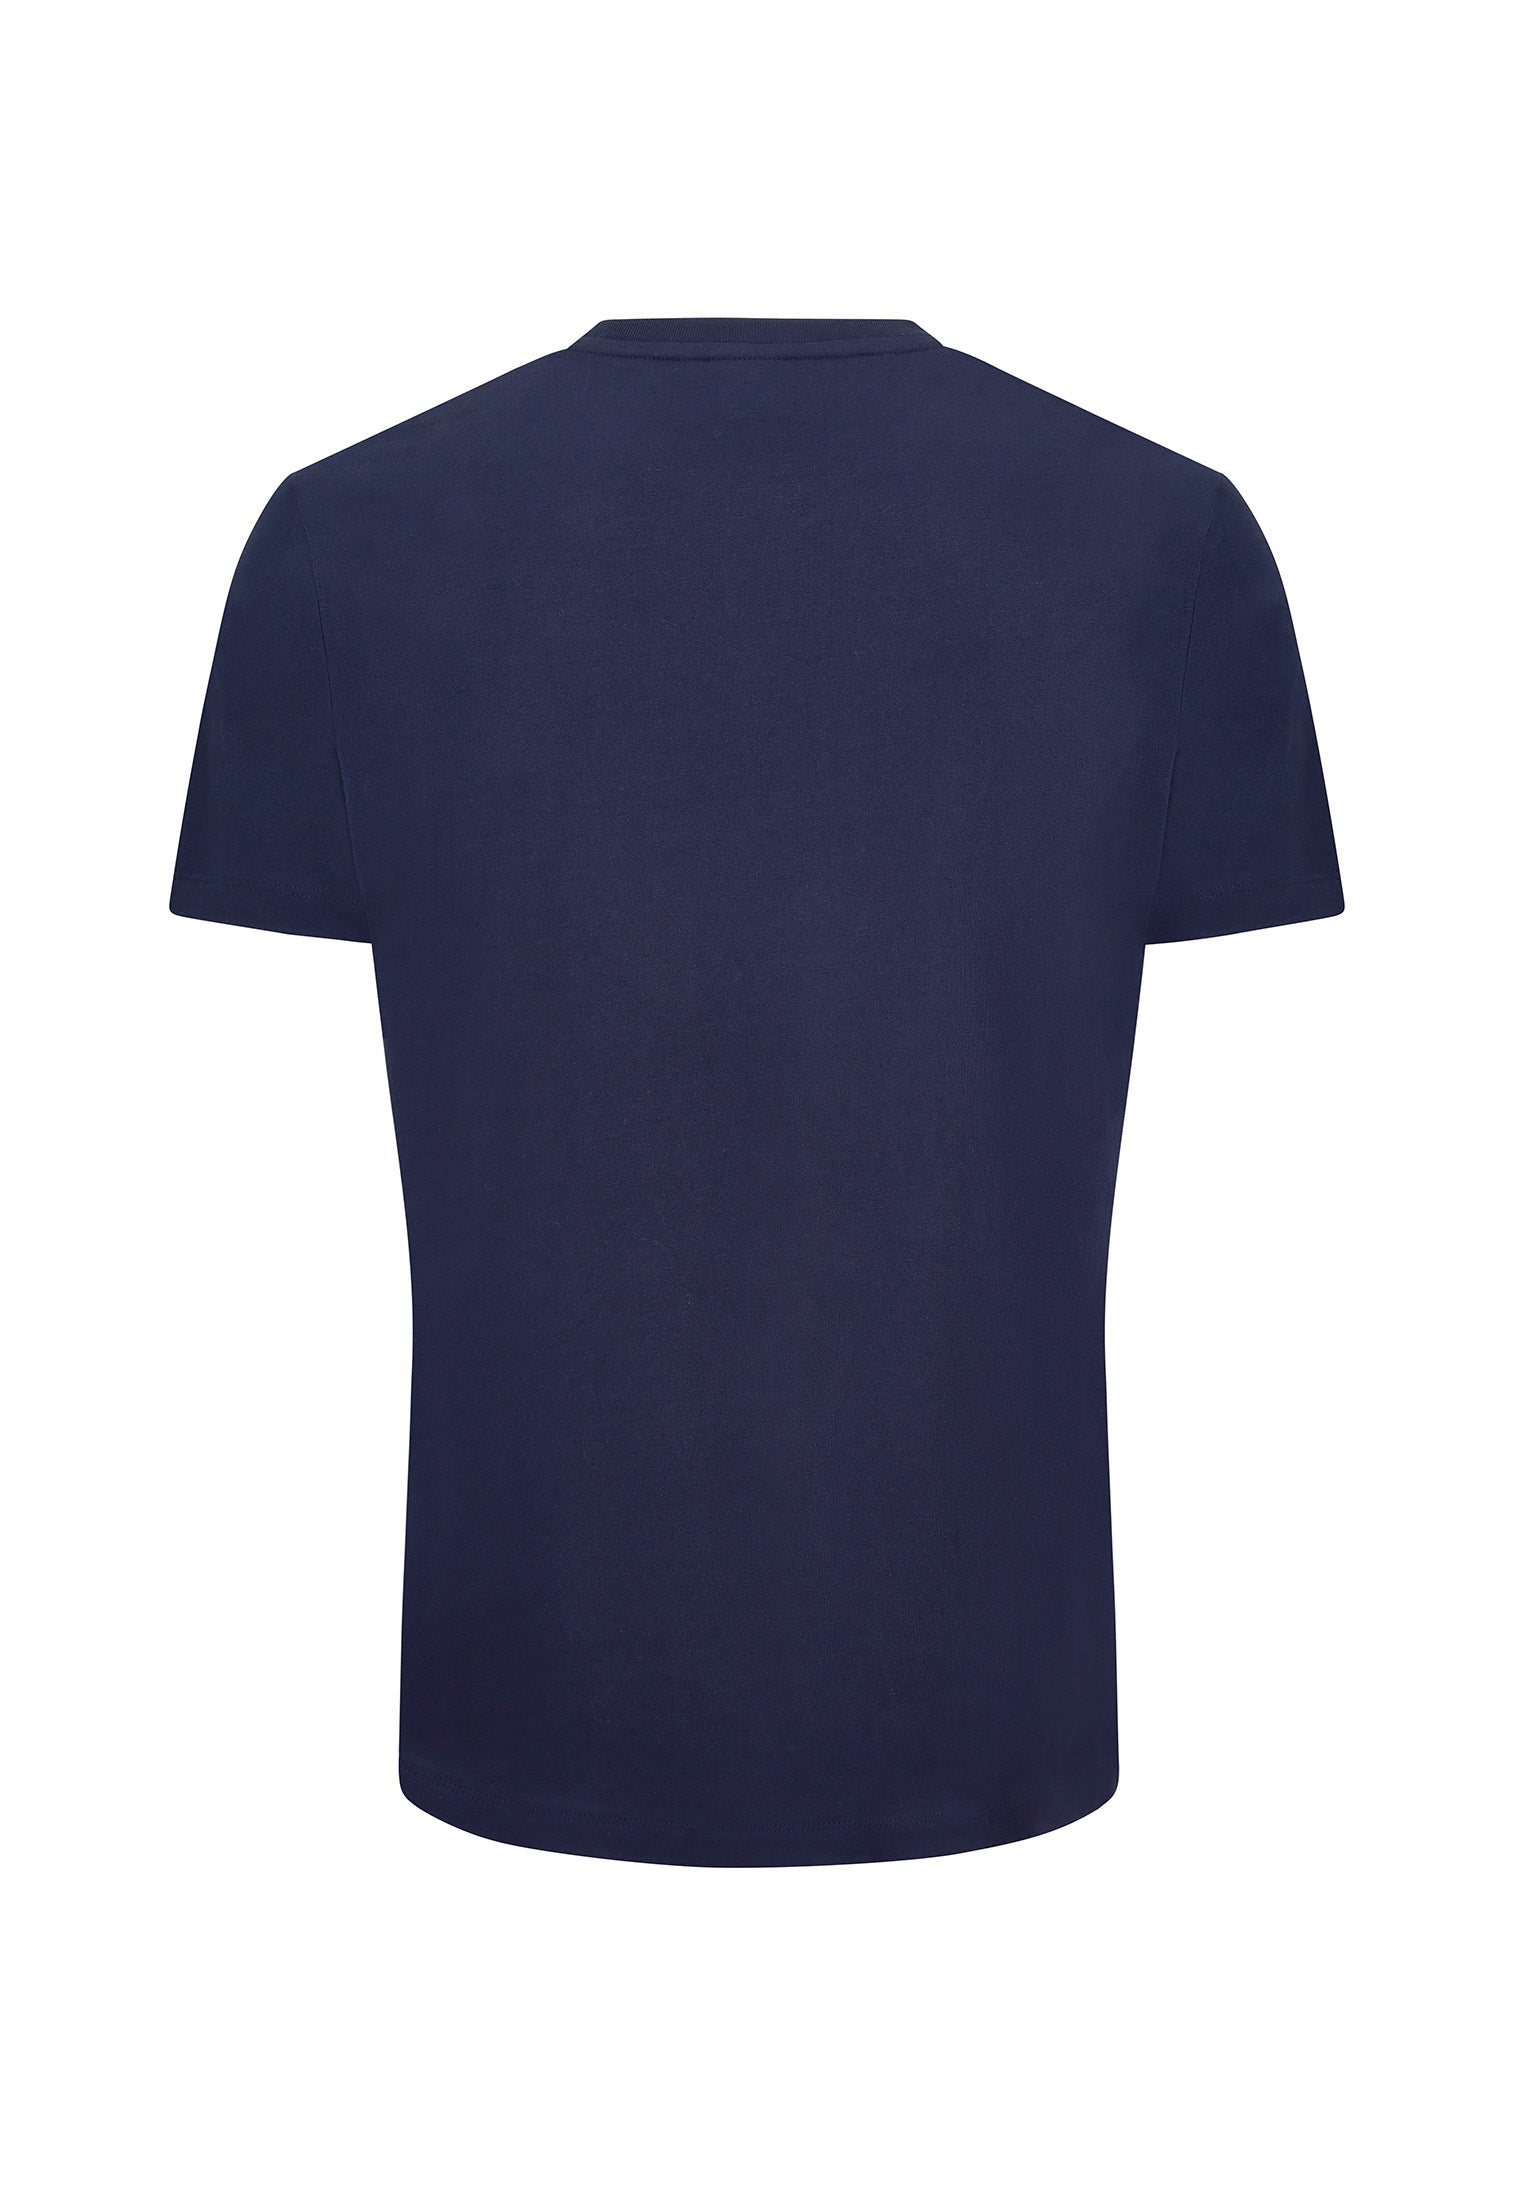 Printed T-Shirt by Merc in Blue